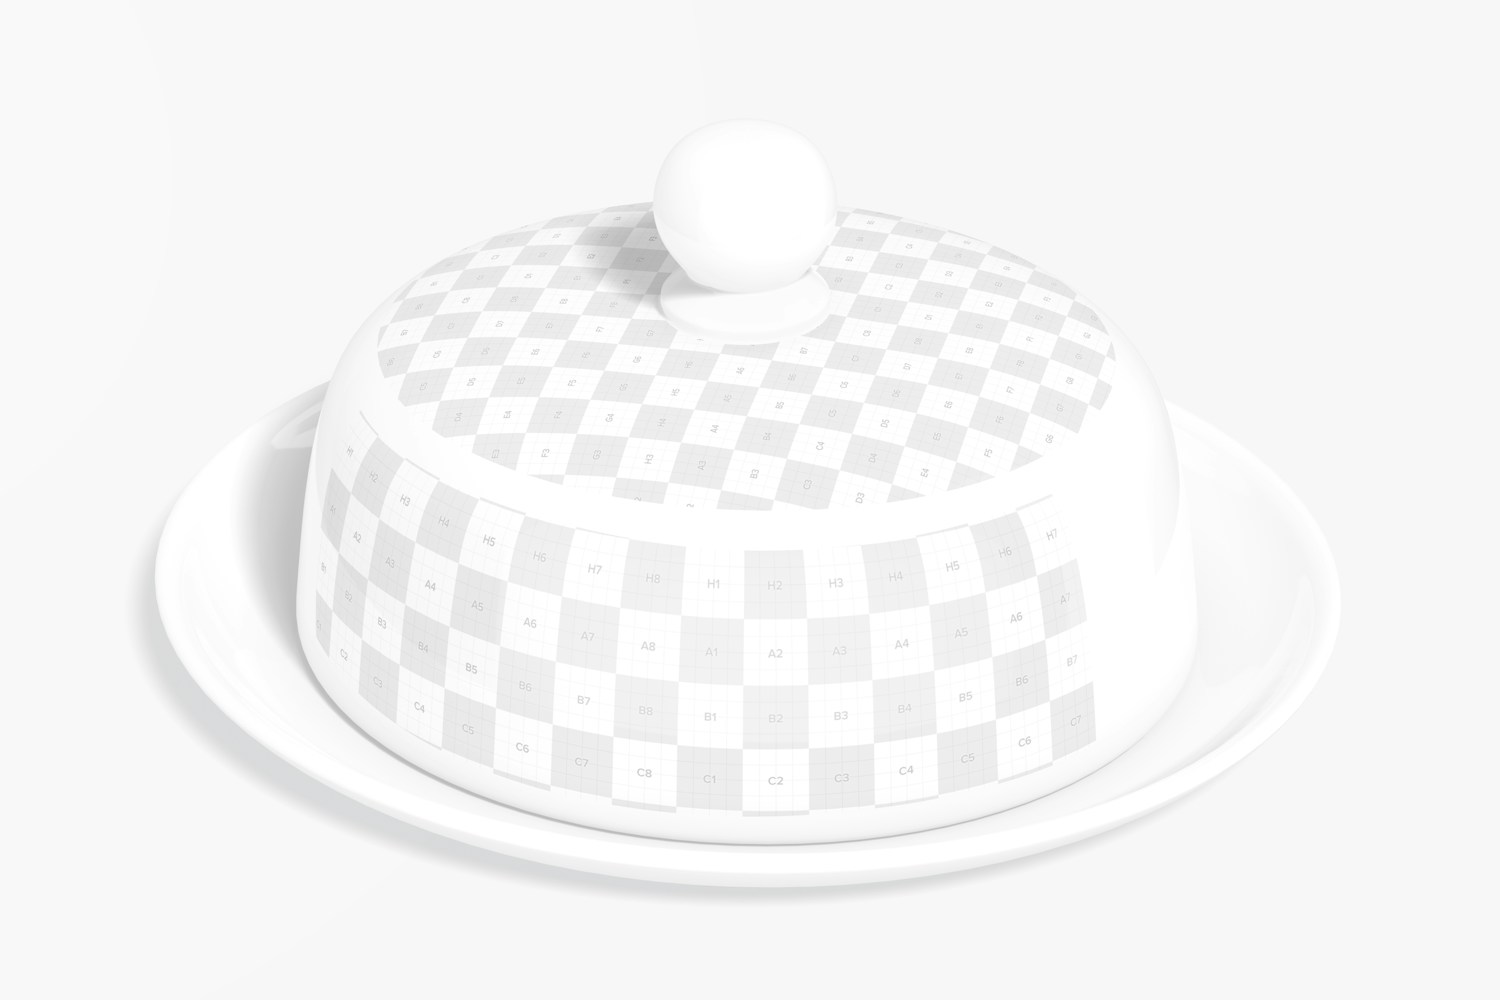 Mini Oval Butter Dish with Lid Mockup, Perspective